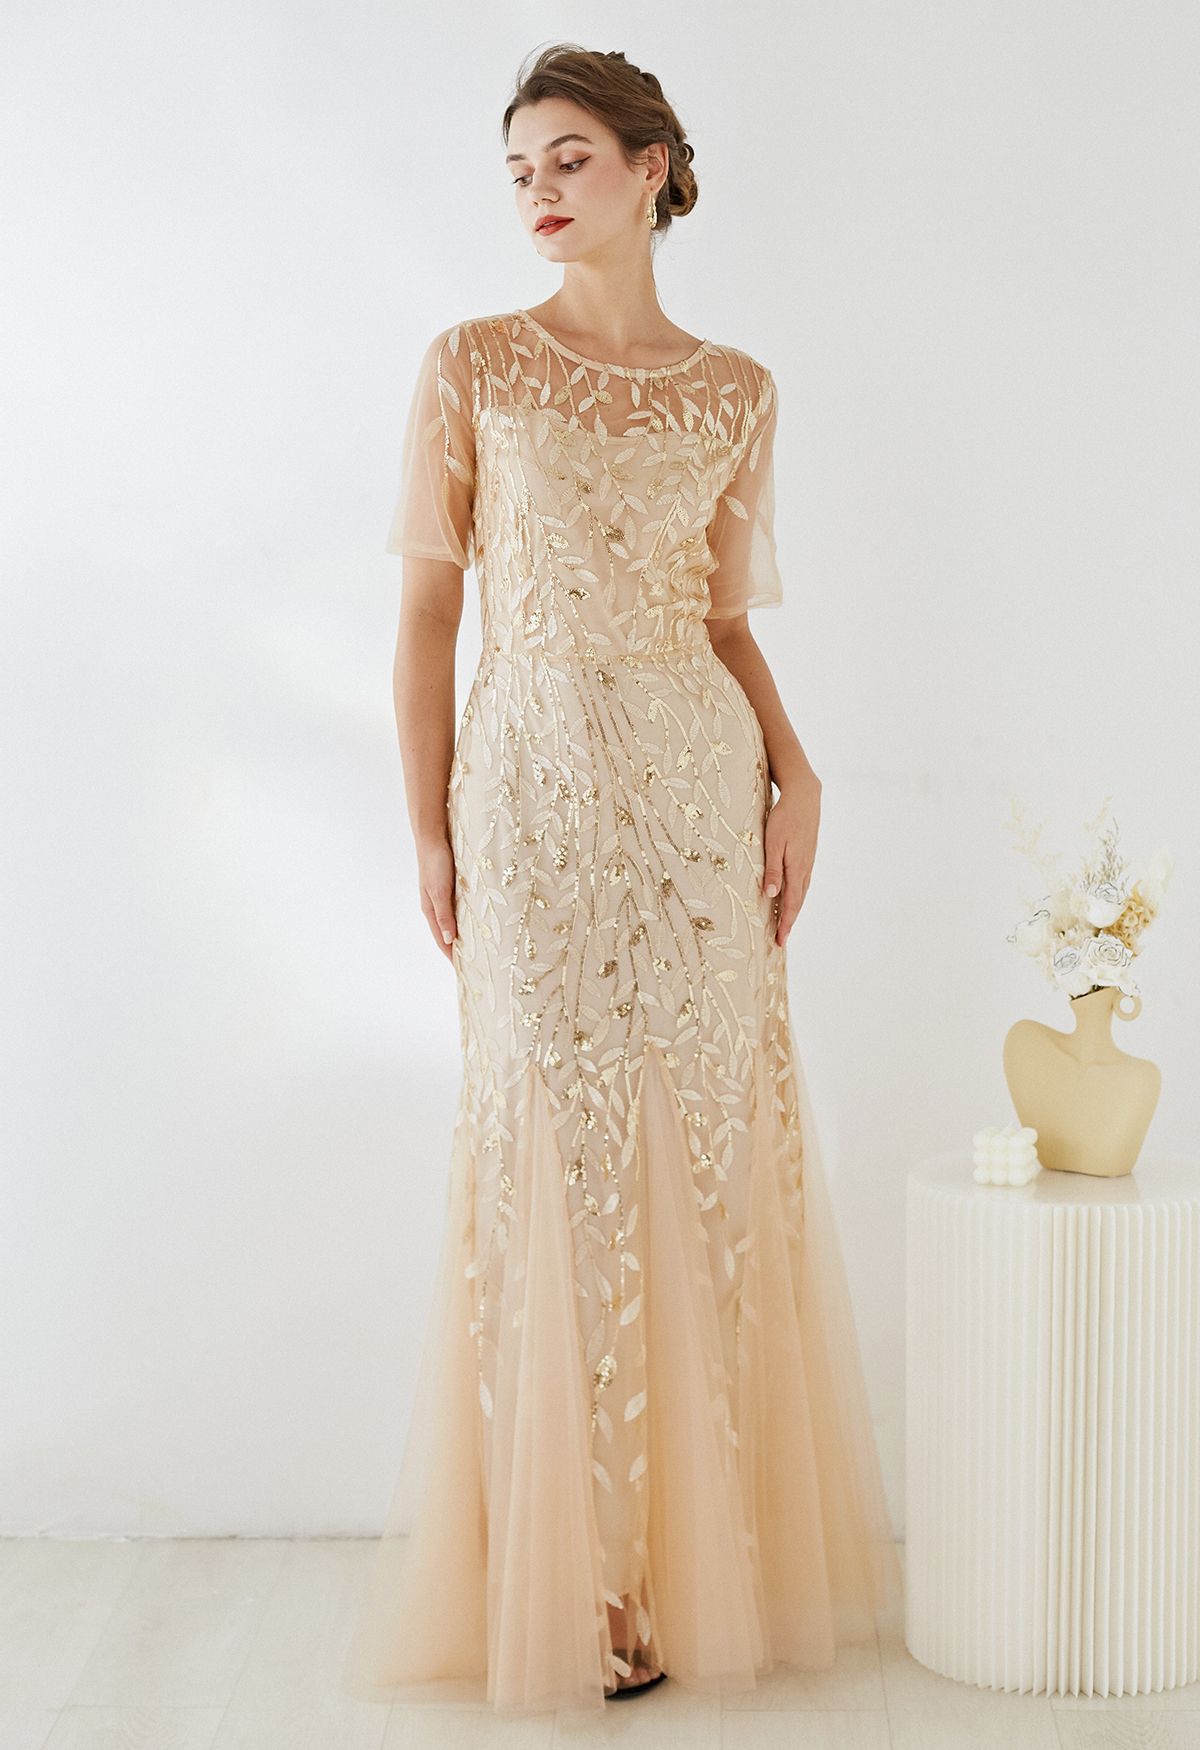 Leaves Branch Sequined Mesh Panelled Gown in Apricot